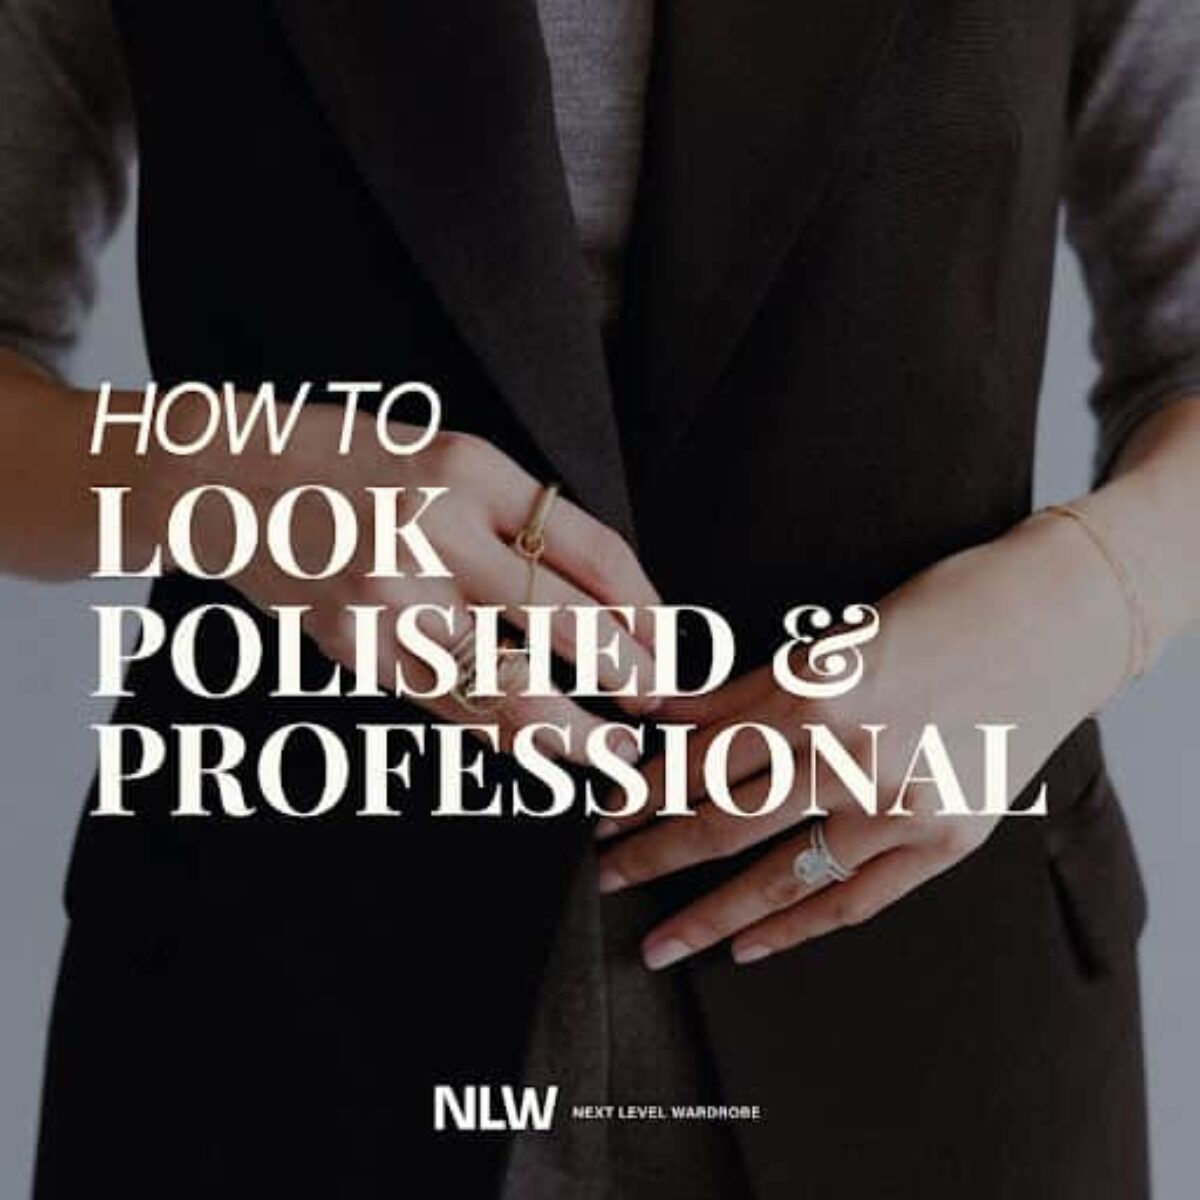 How To Look Polished and Professional